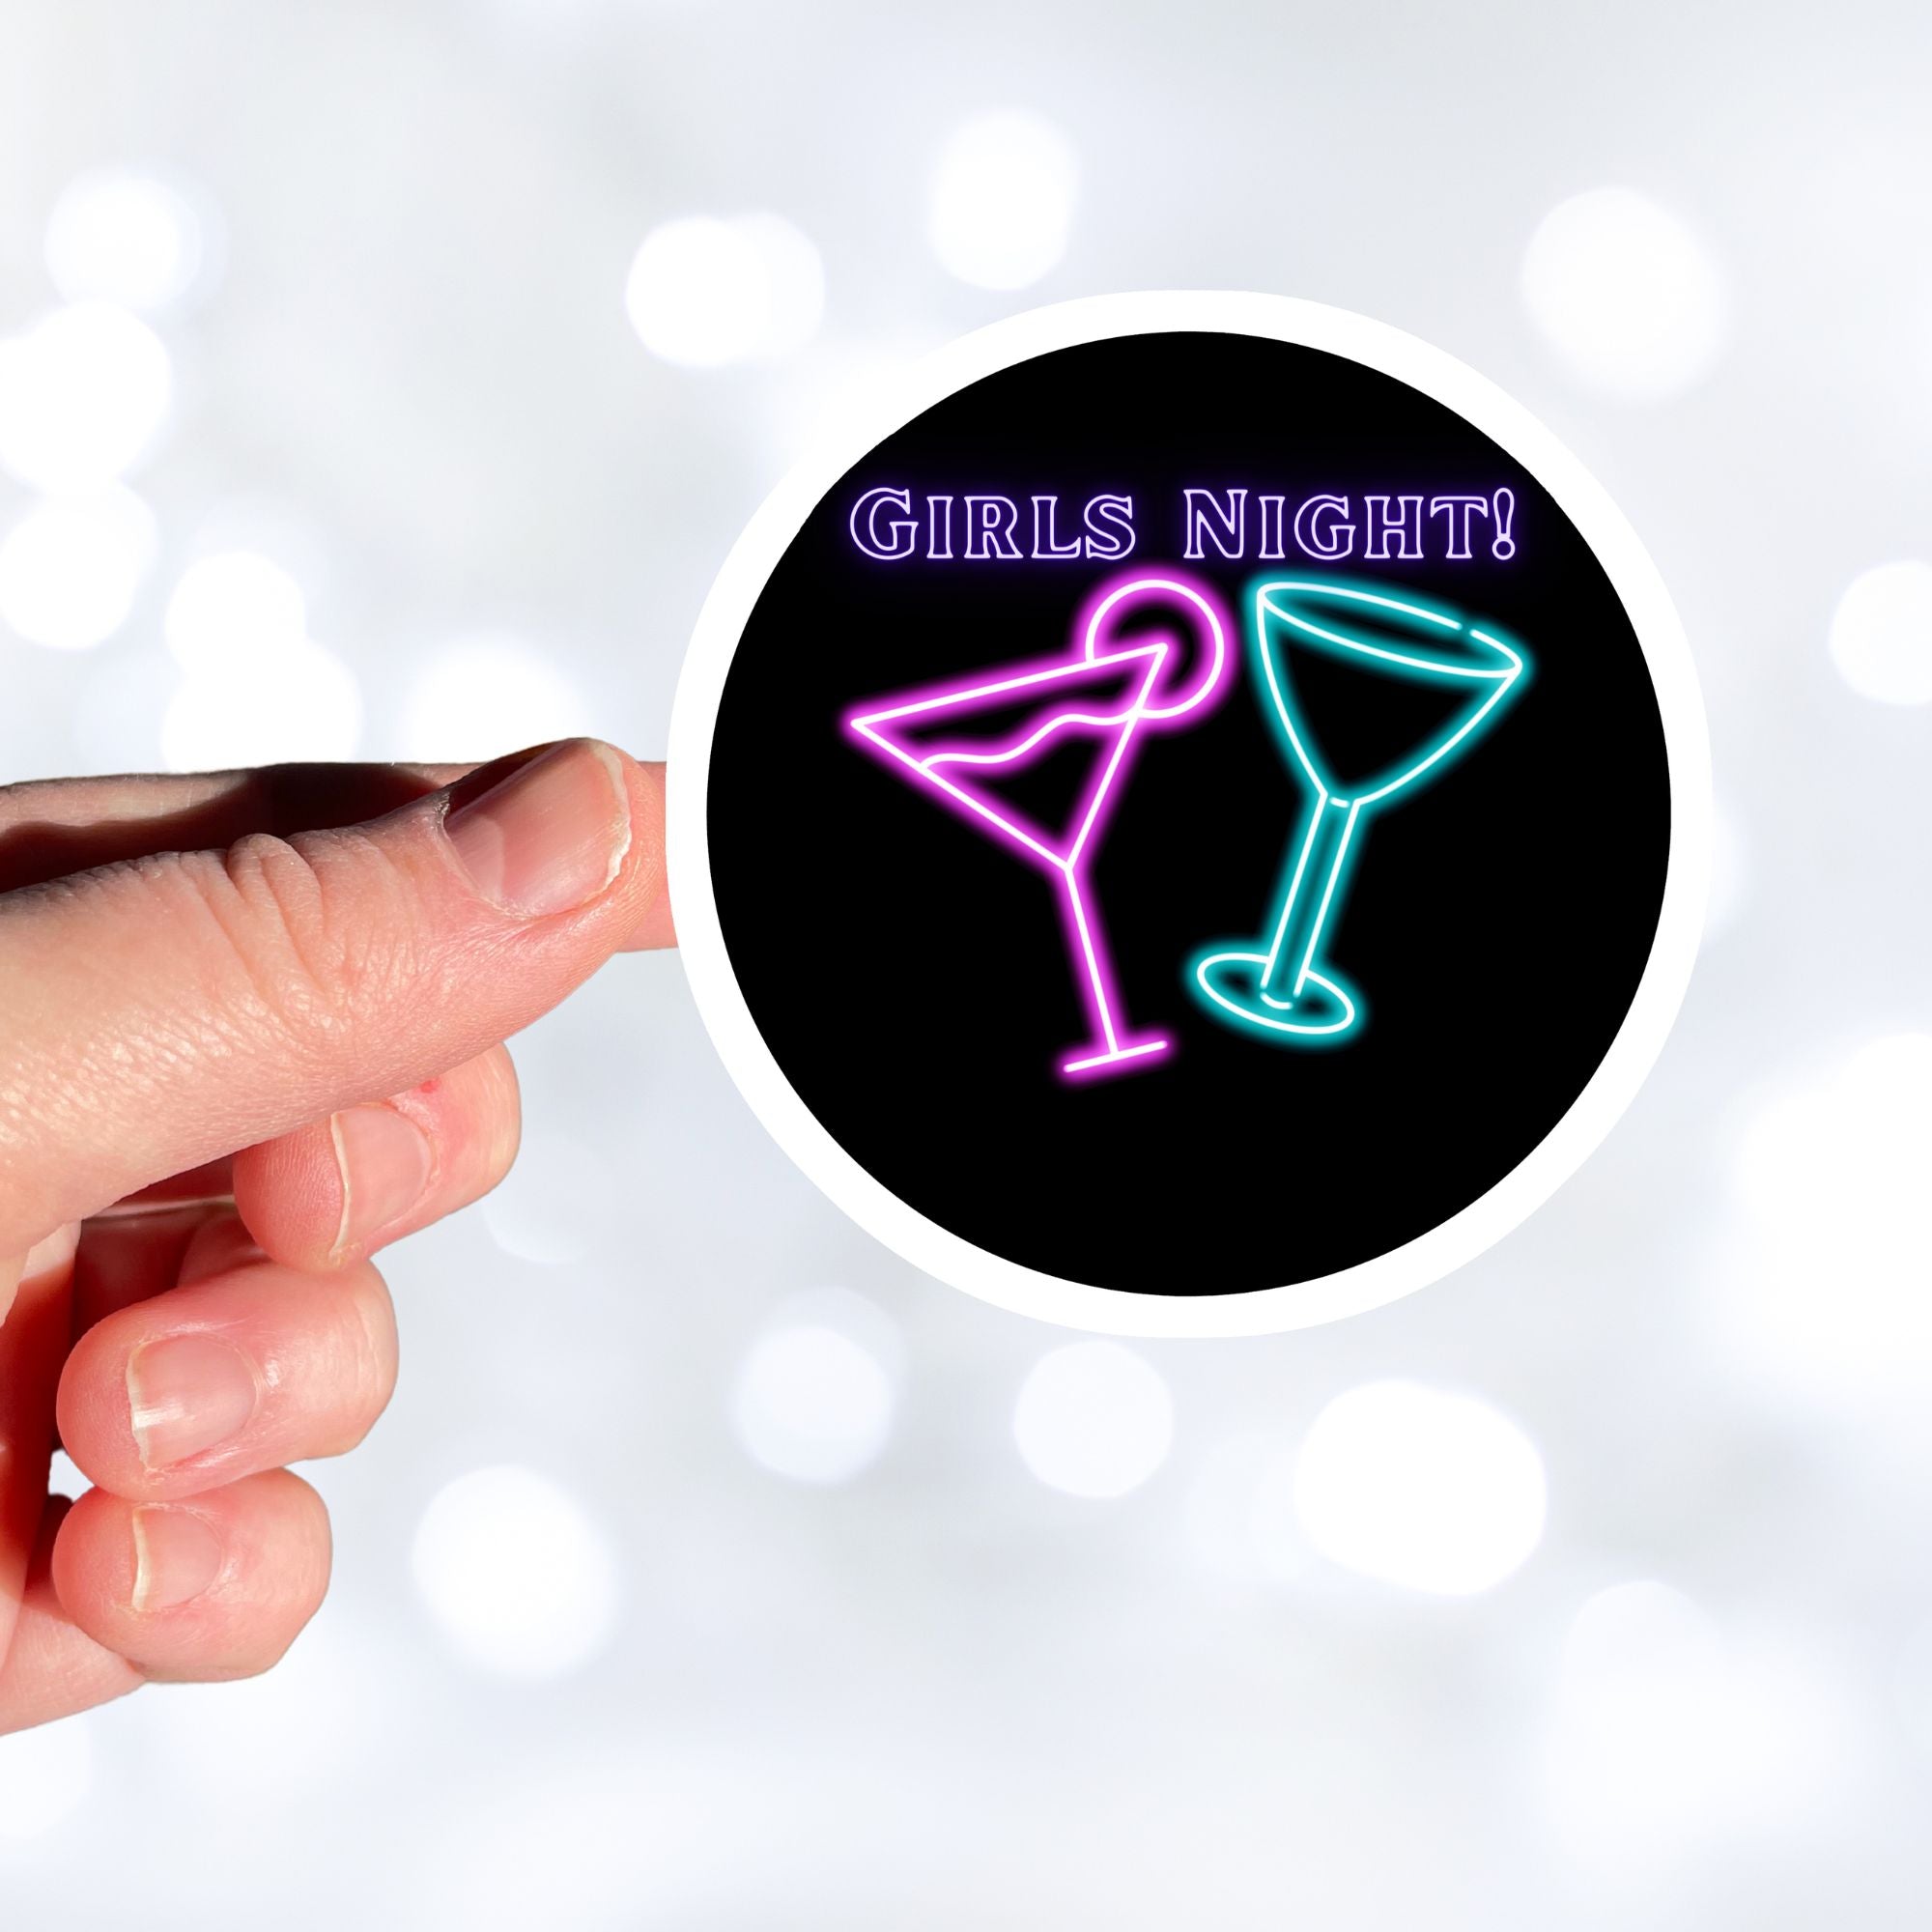 Ladies, it's time to hit the town! This neon die-cut sticker features a couple of cocktail glasses with "Girls Night!" written above. Enjoy! This image shows a hand holding the Girls Night sticker.